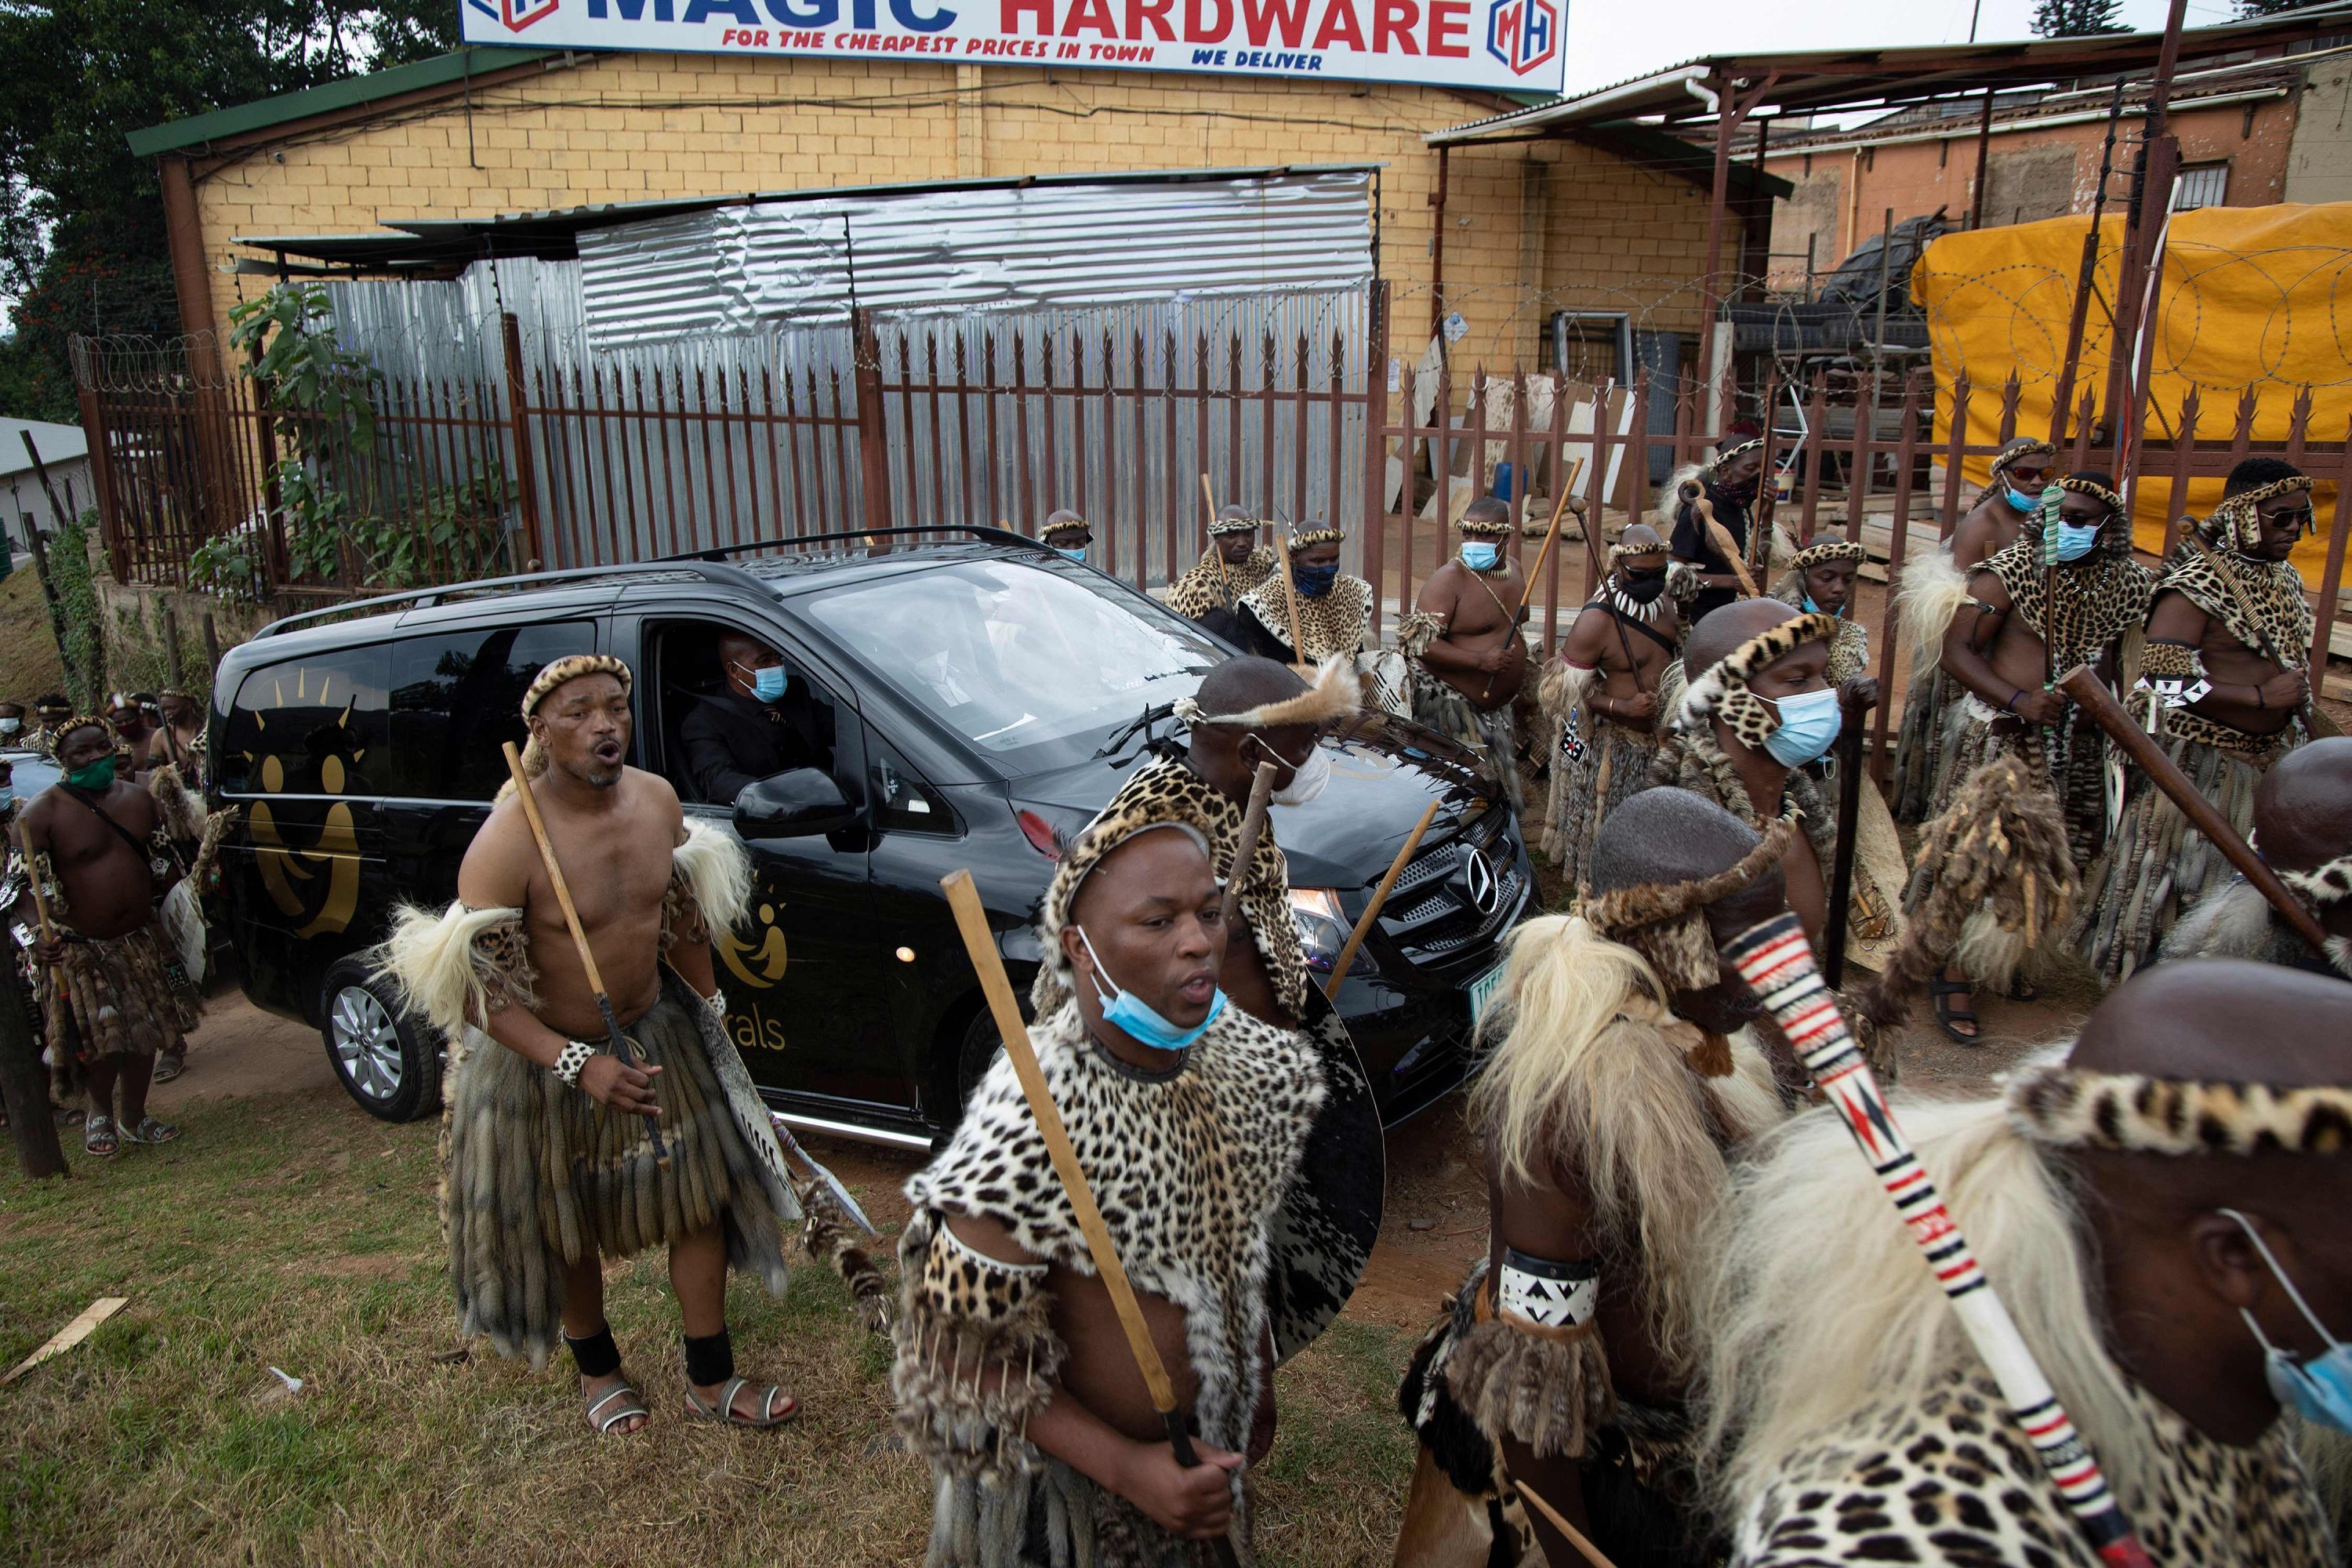 Zulu regiments, also known as amaButho, form a guard of honor as they escort a hearse carrying the body of King Goodwill Zwelithini from a mortuary in Nongoma, KwaZulu Natal, South Africa, March 17, 2021. (Photo by Phill Magakoe / AFP)